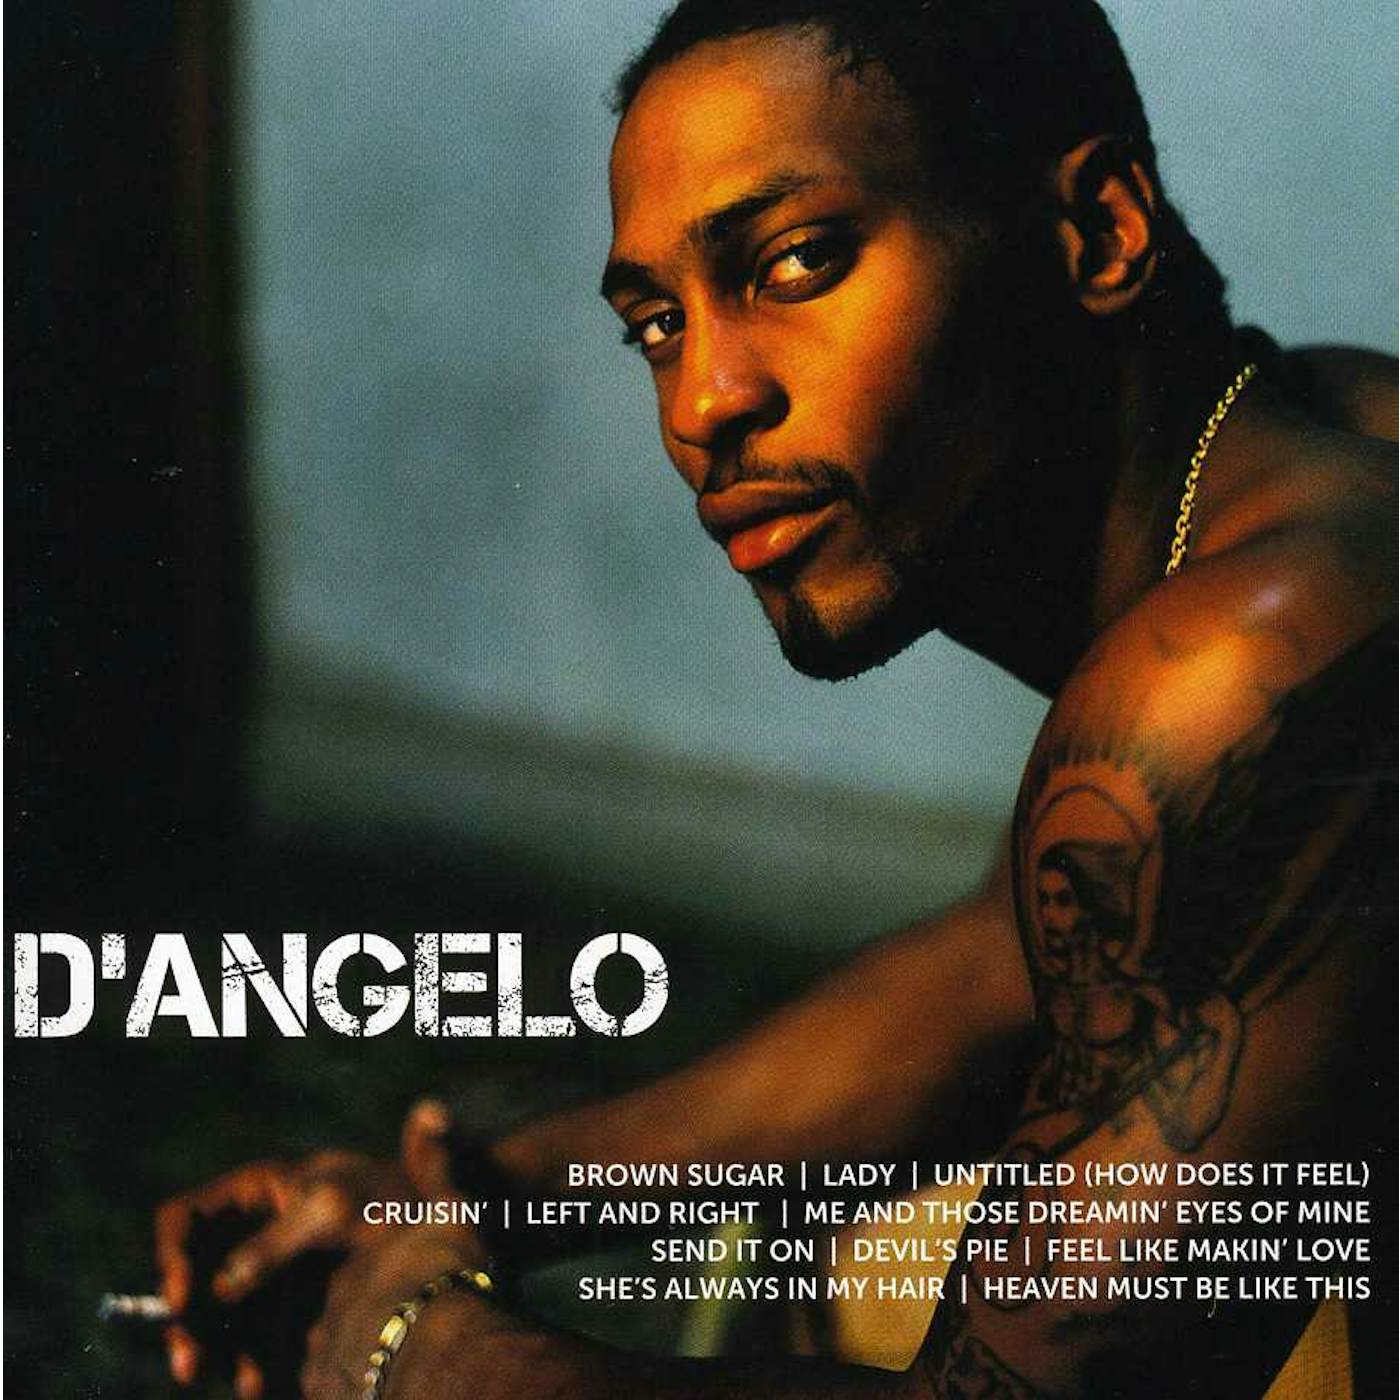 D'Angelo ICON CD